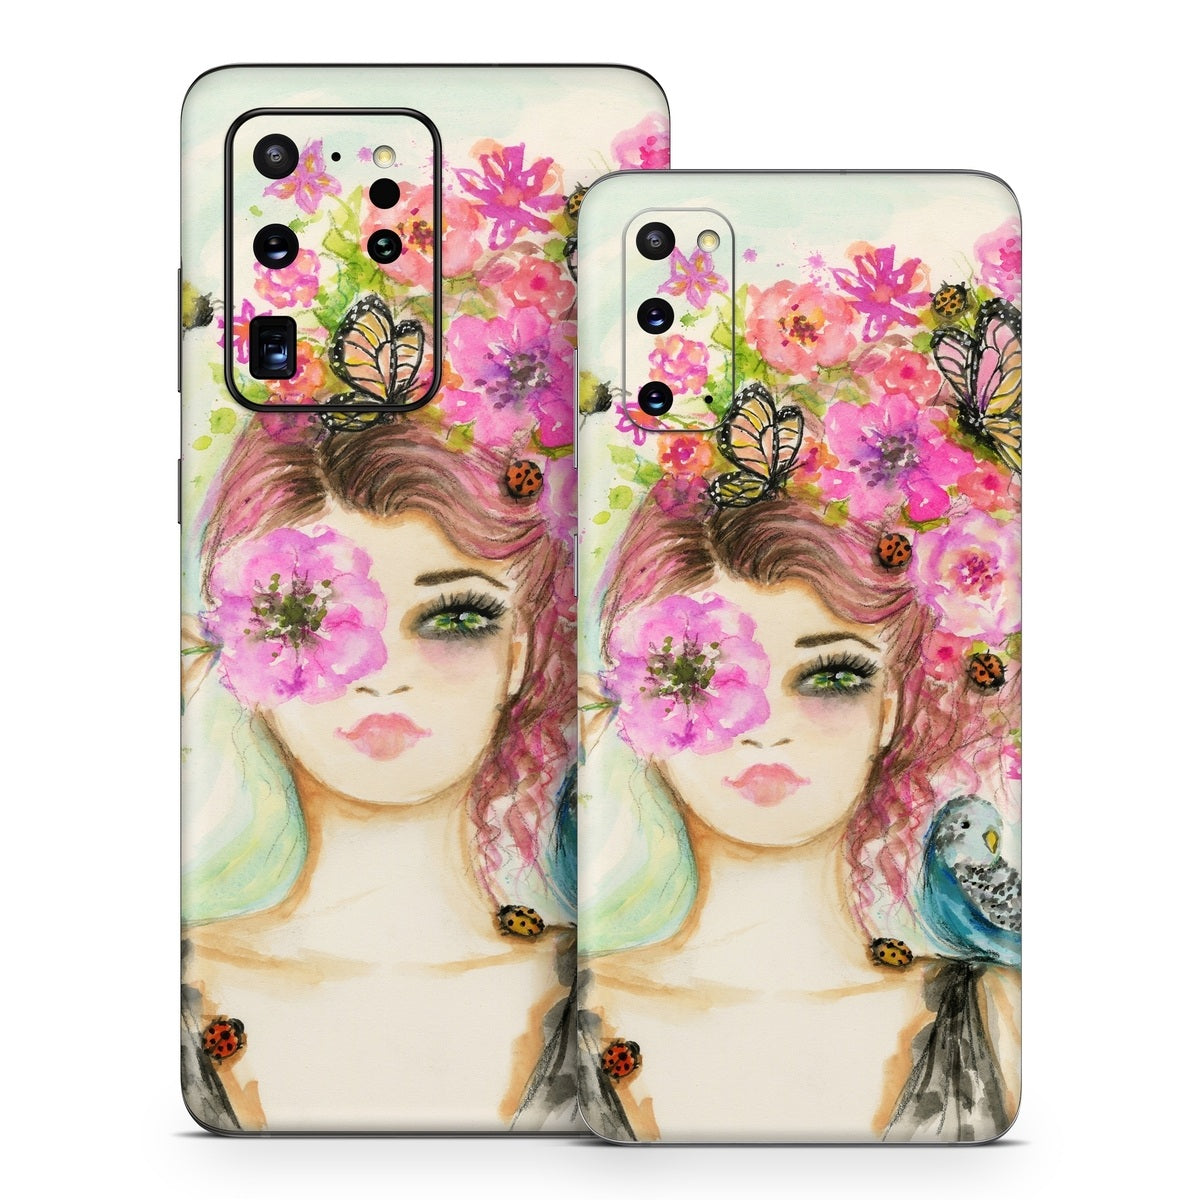 Spring is Here - Samsung Galaxy S20 Skin